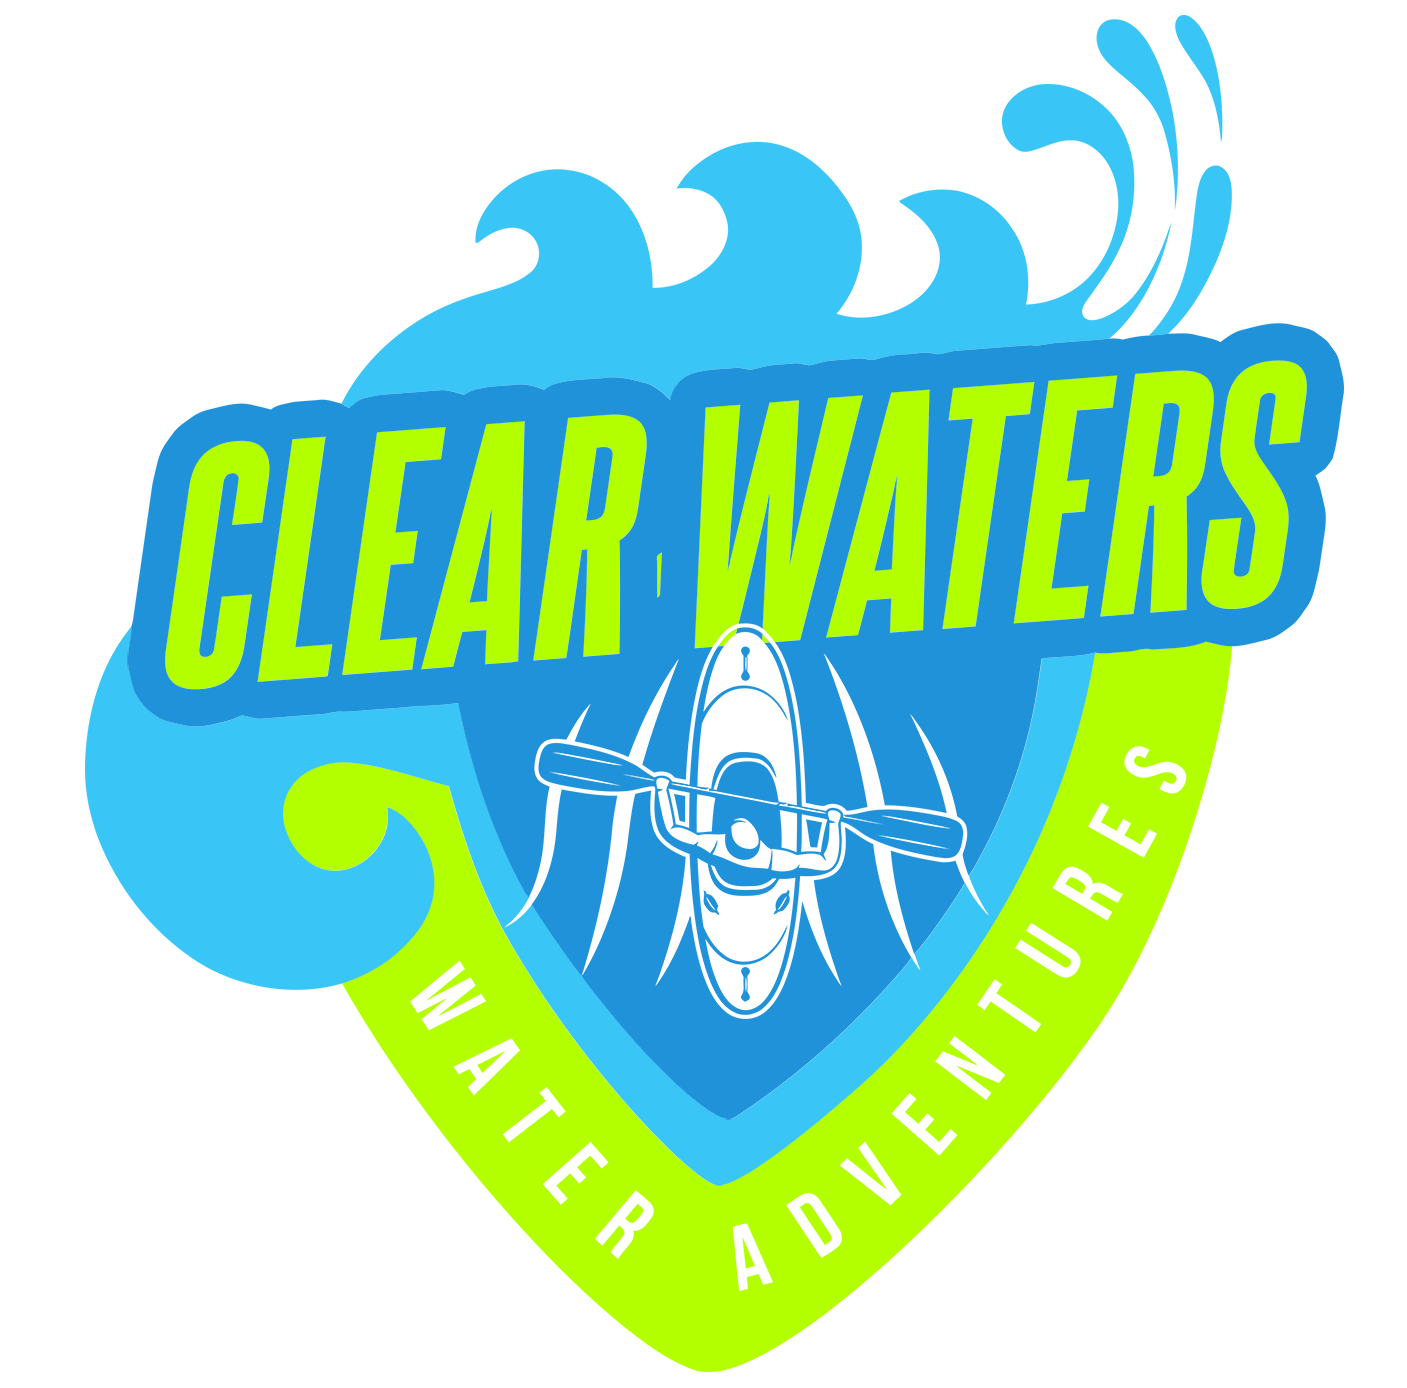 ClearWaters